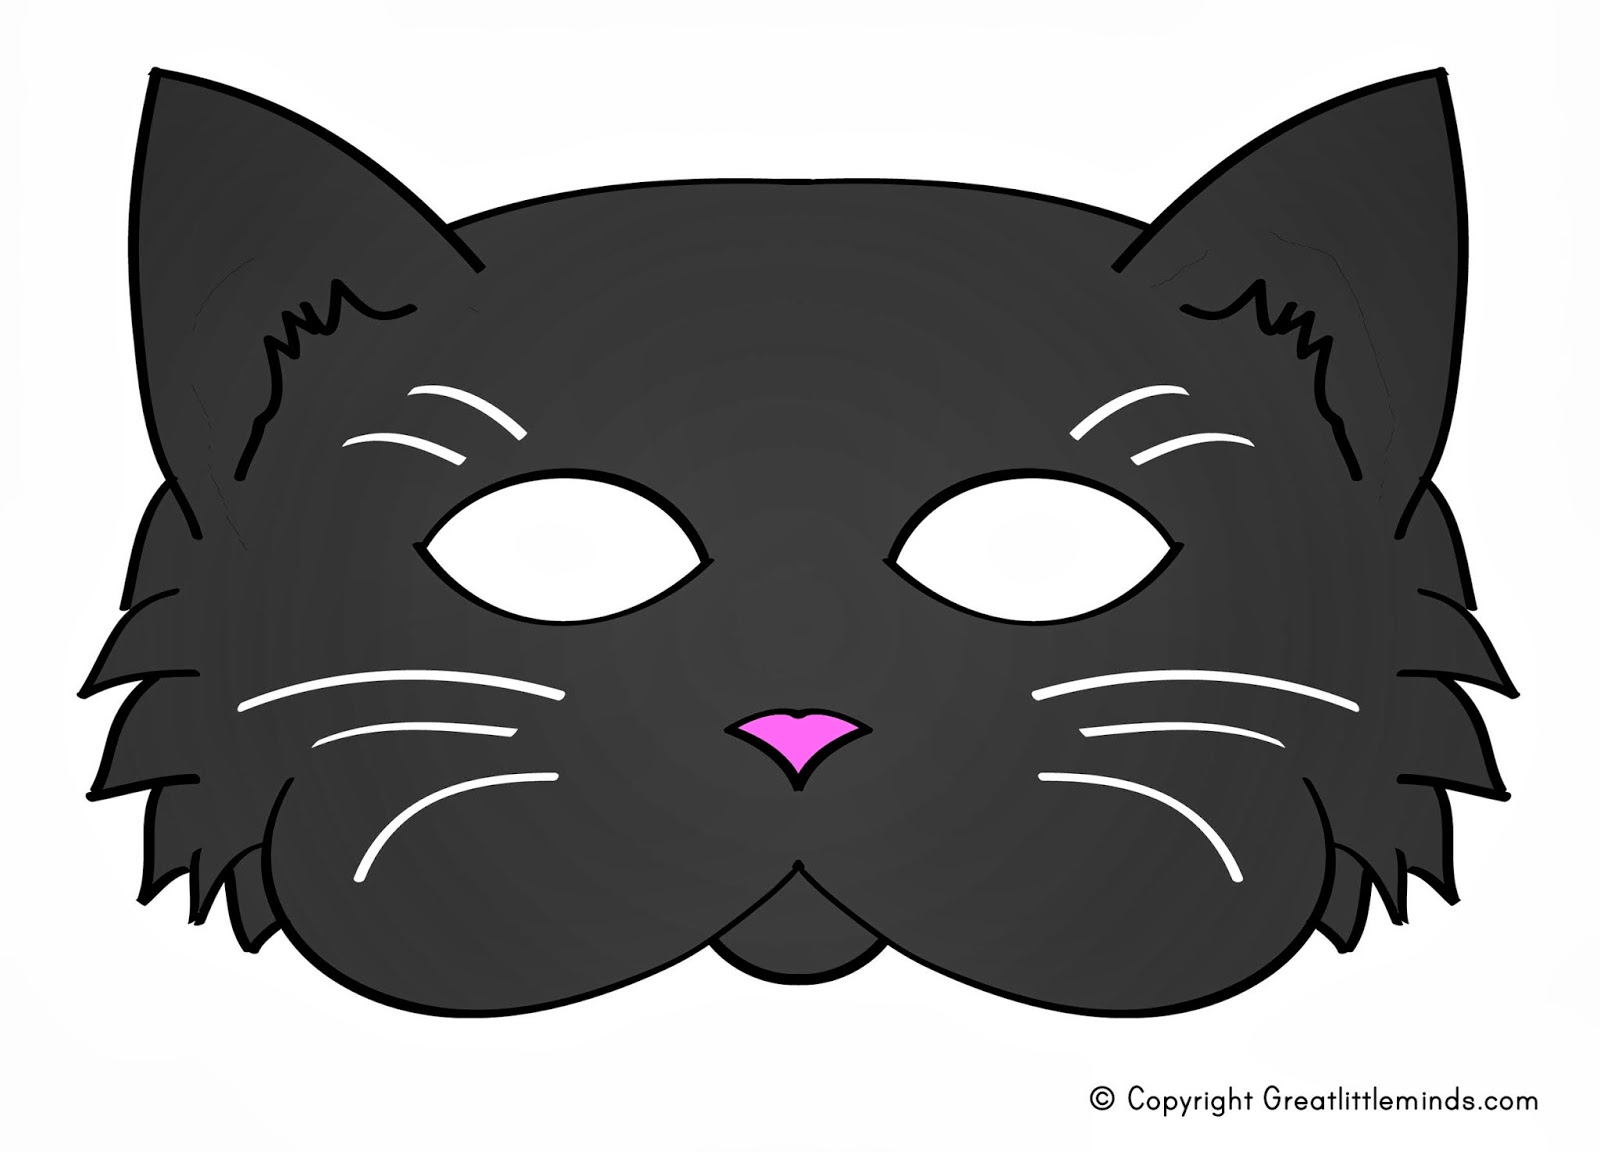 early-play-templates-5-printable-halloween-cat-masks-to-make